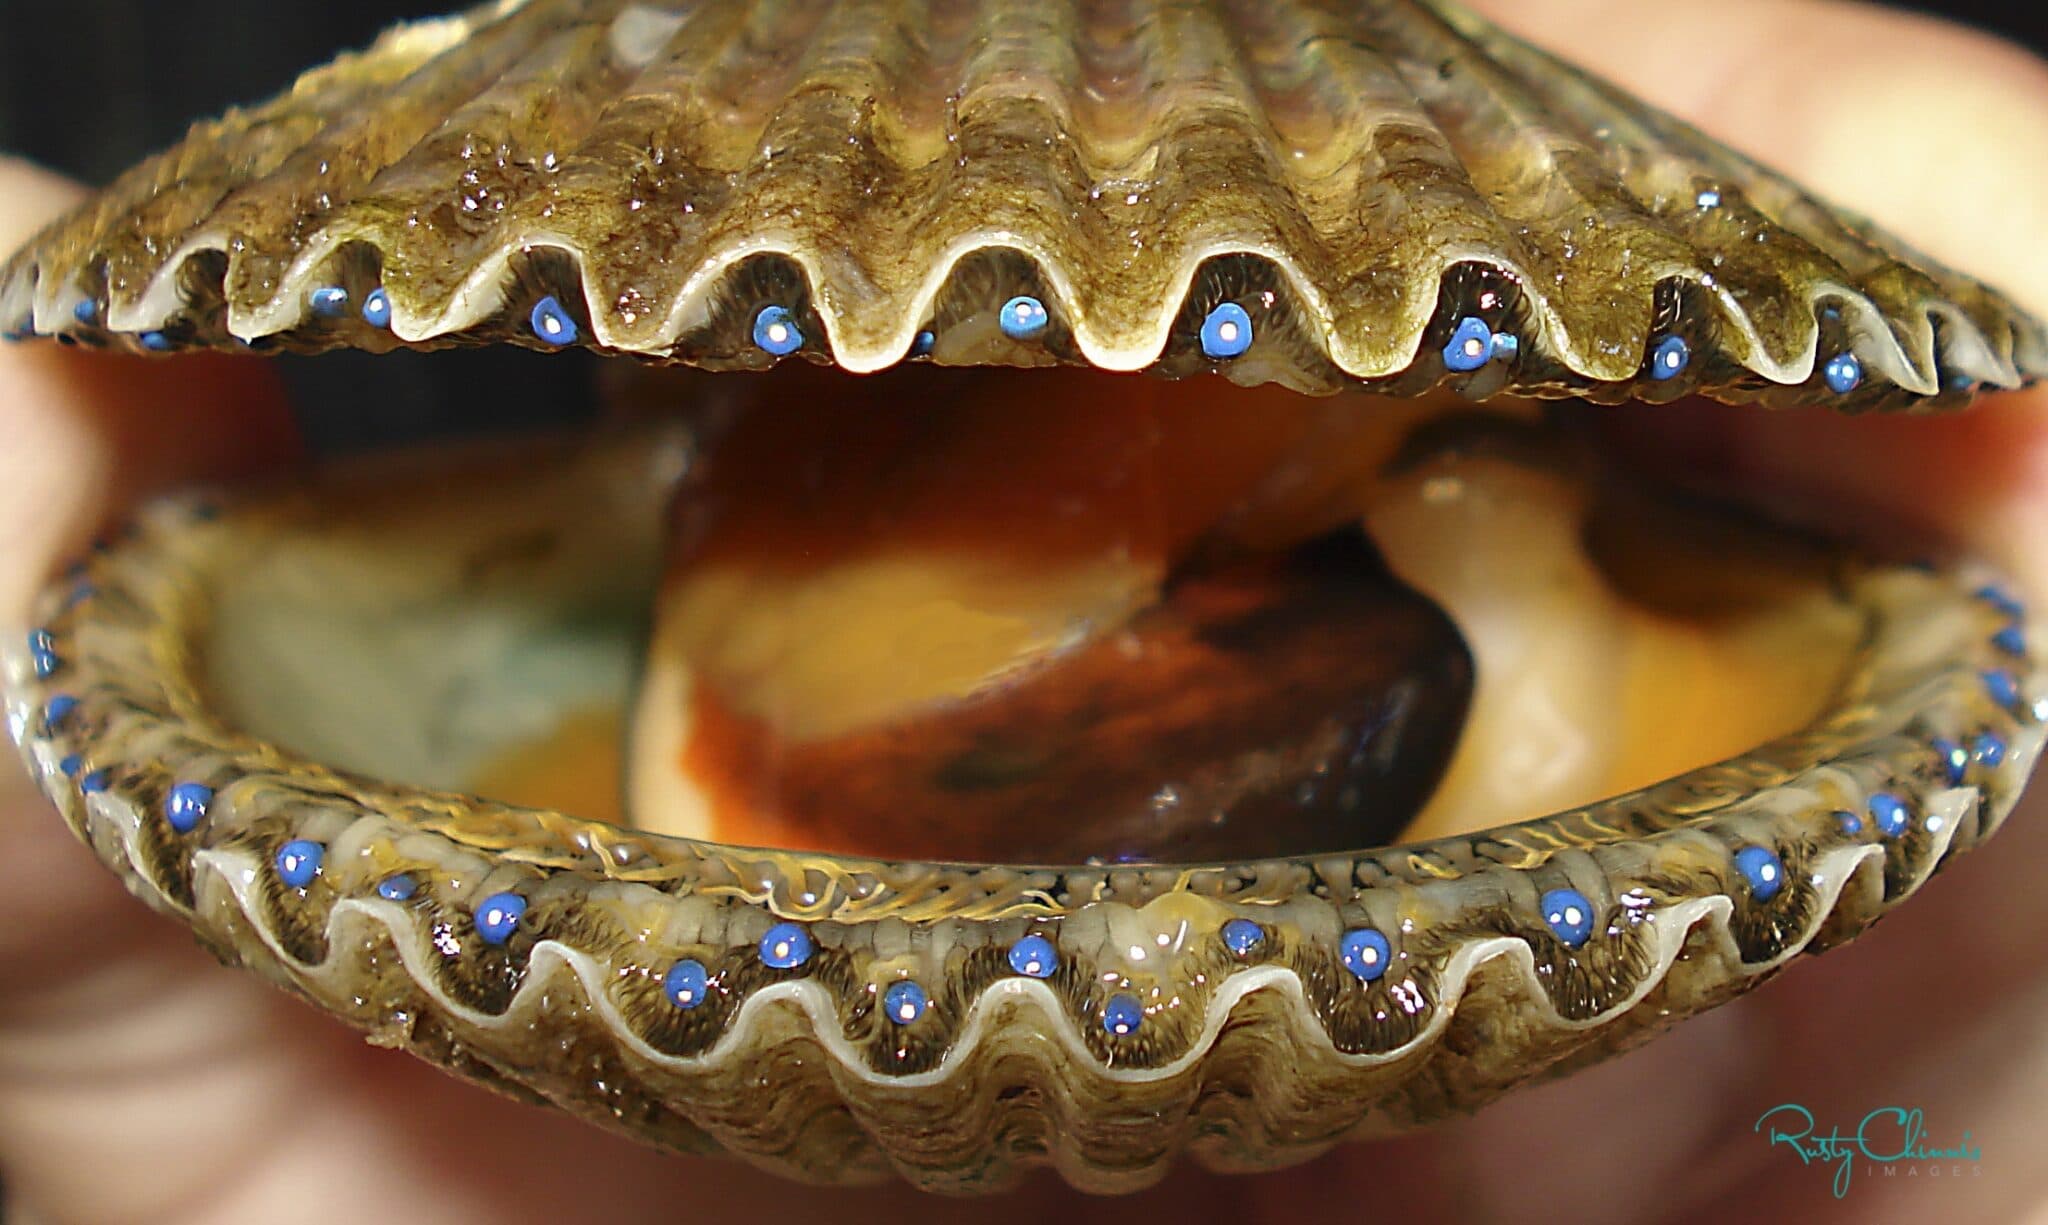 Close Up Of A Partially Open Scallop